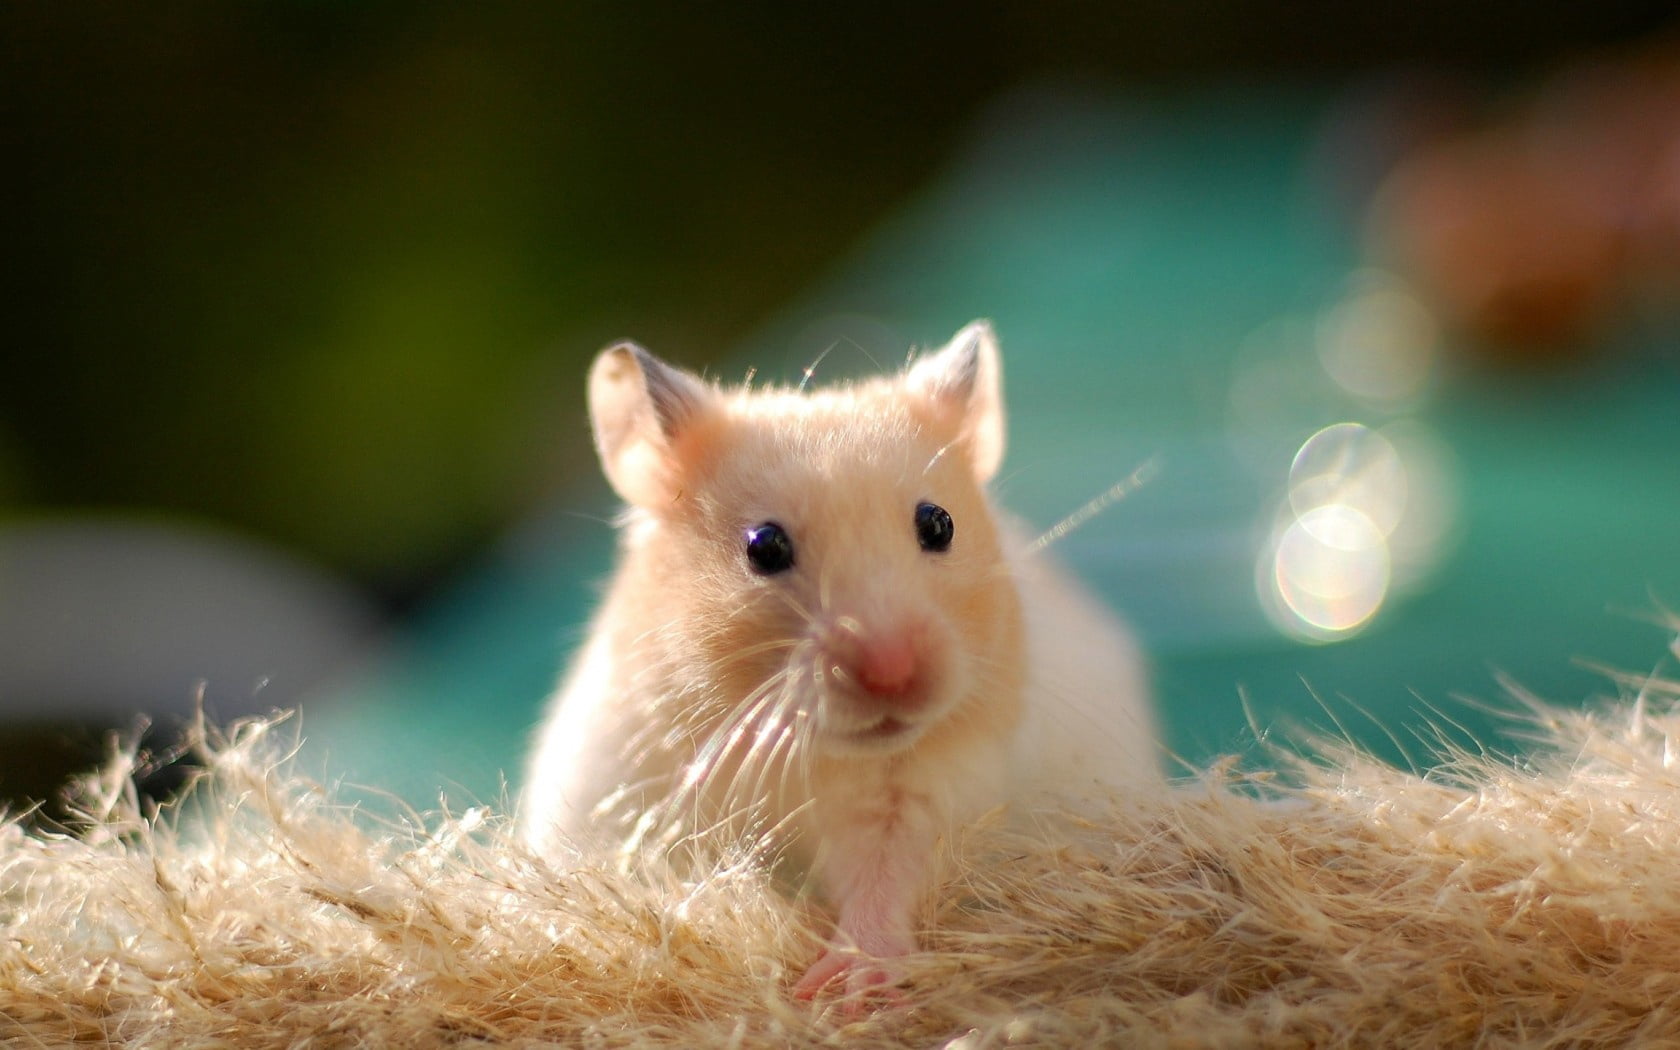 white and beige mouse, hamster, rodent, animal, cute, pets, mammal